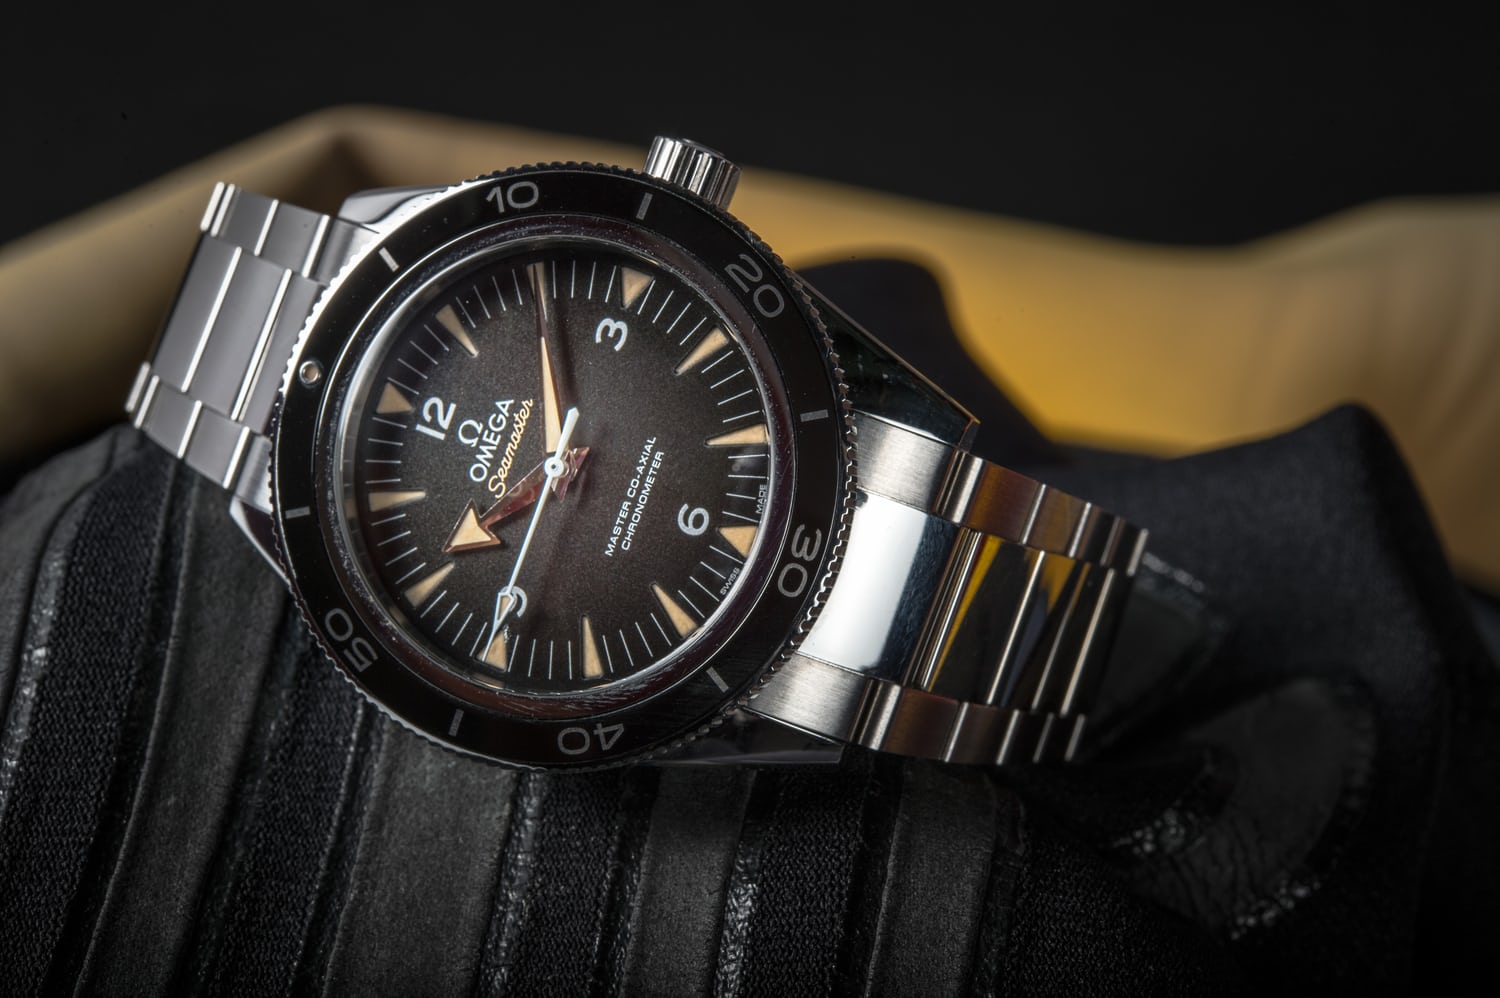 In-Depth: Diving Into The Past With The New Omega Seamaster 300 Master  Co-Axial - Hodinkee